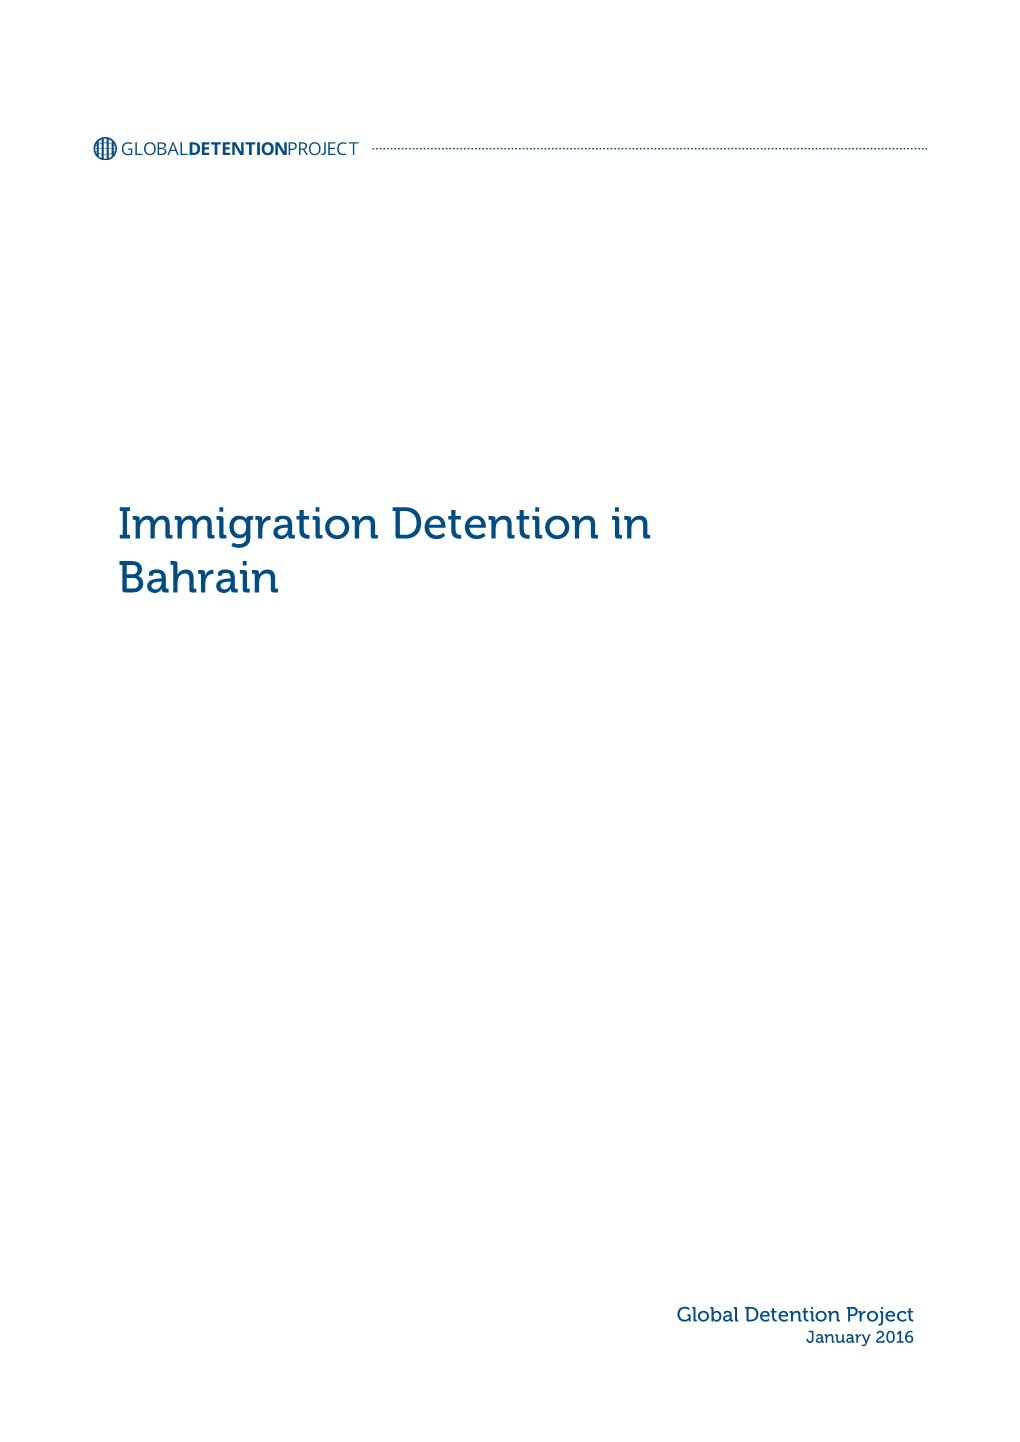 Immigration Detention in Bahrain